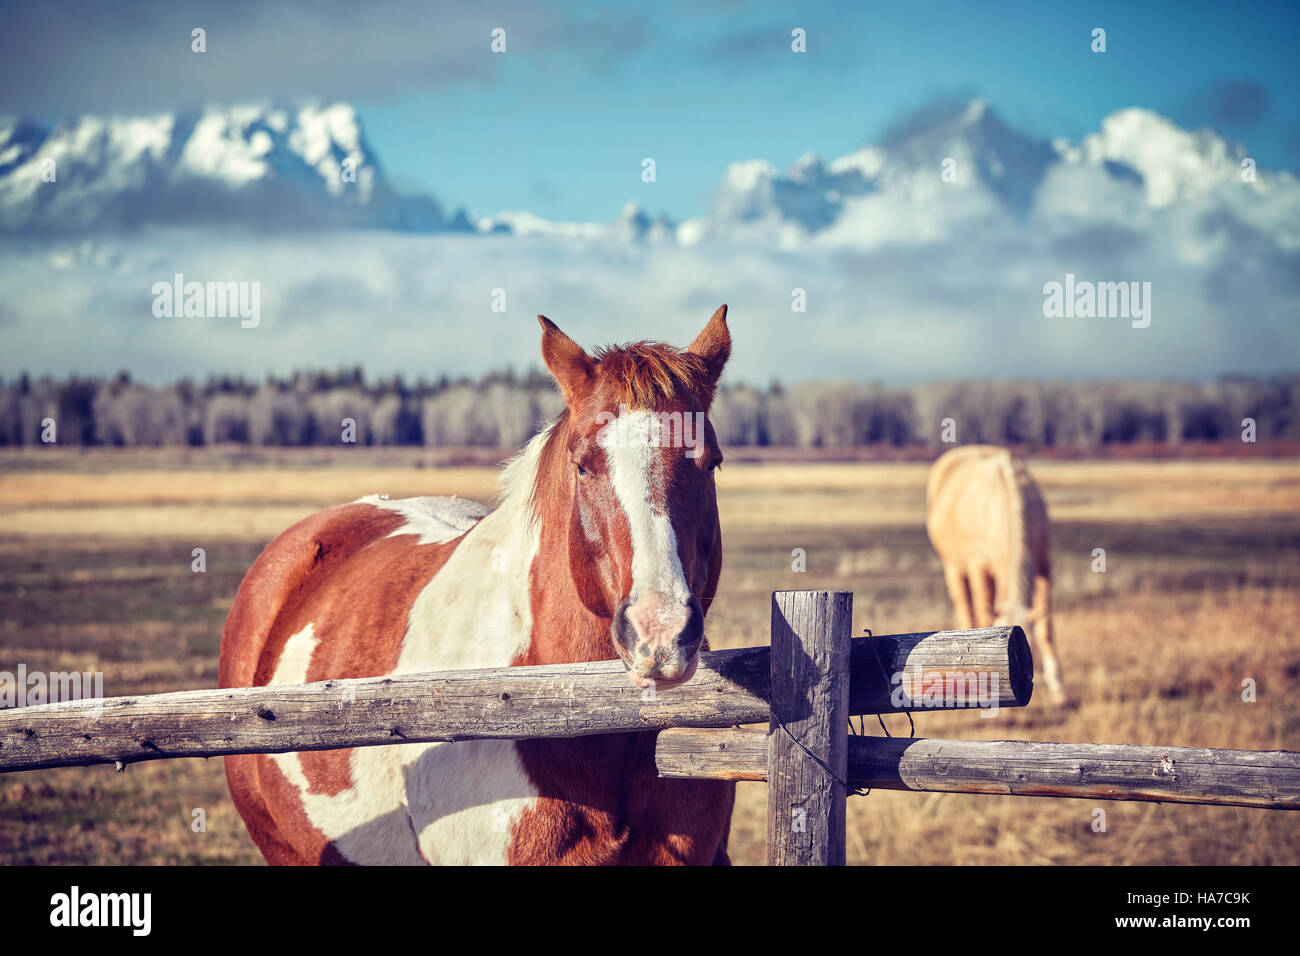 Vintage toned photo of a chestnut horse with Grand Teton mountains in background, Wyoming, USA. Stock Photo